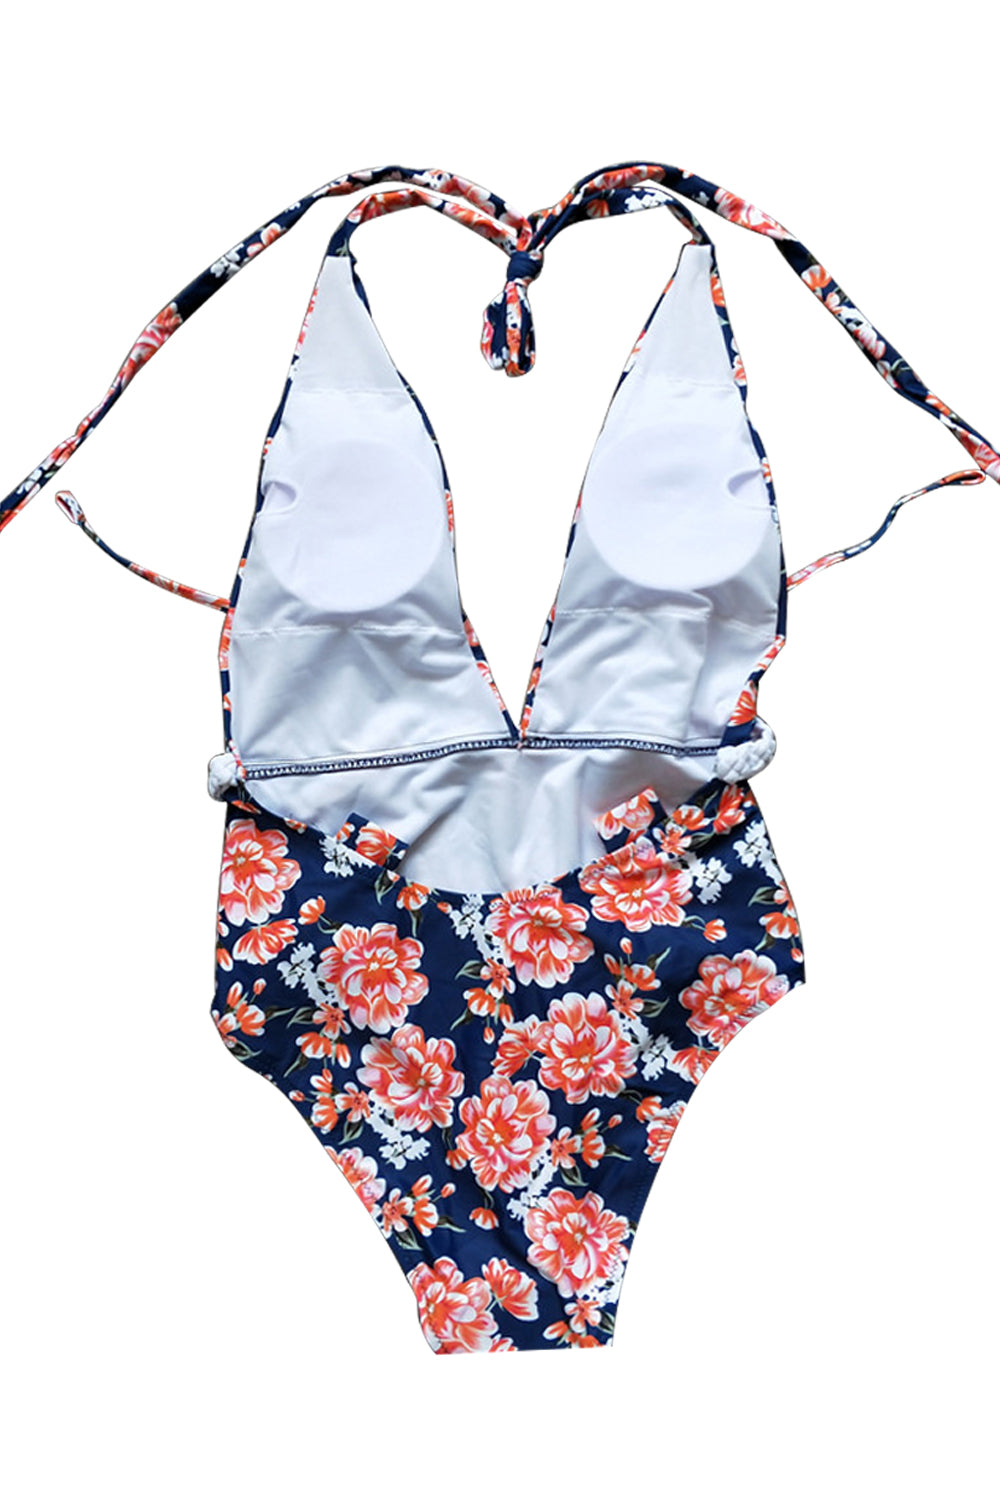 Iyasson Blue Floral Printing With Deep V-neckline One-piece swimsuit